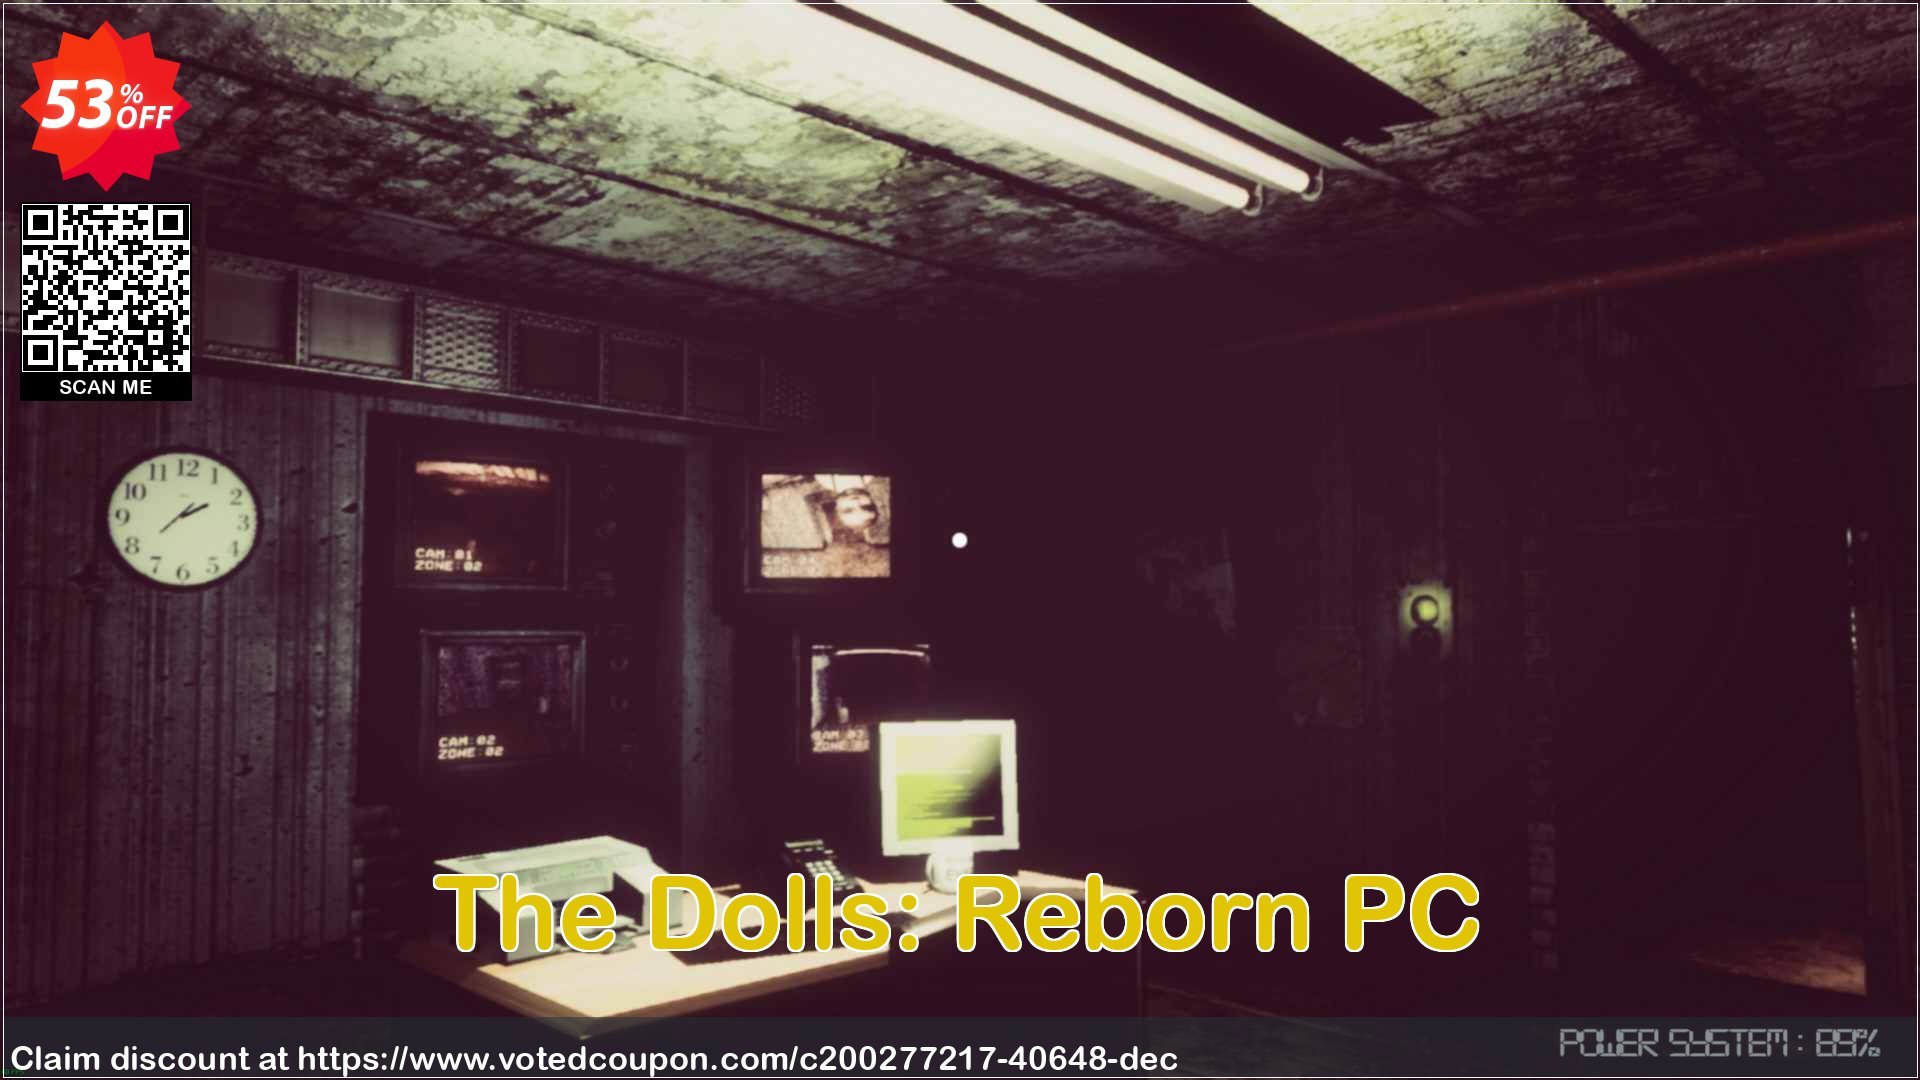 The Dolls: Reborn PC Coupon Code May 2024, 53% OFF - VotedCoupon